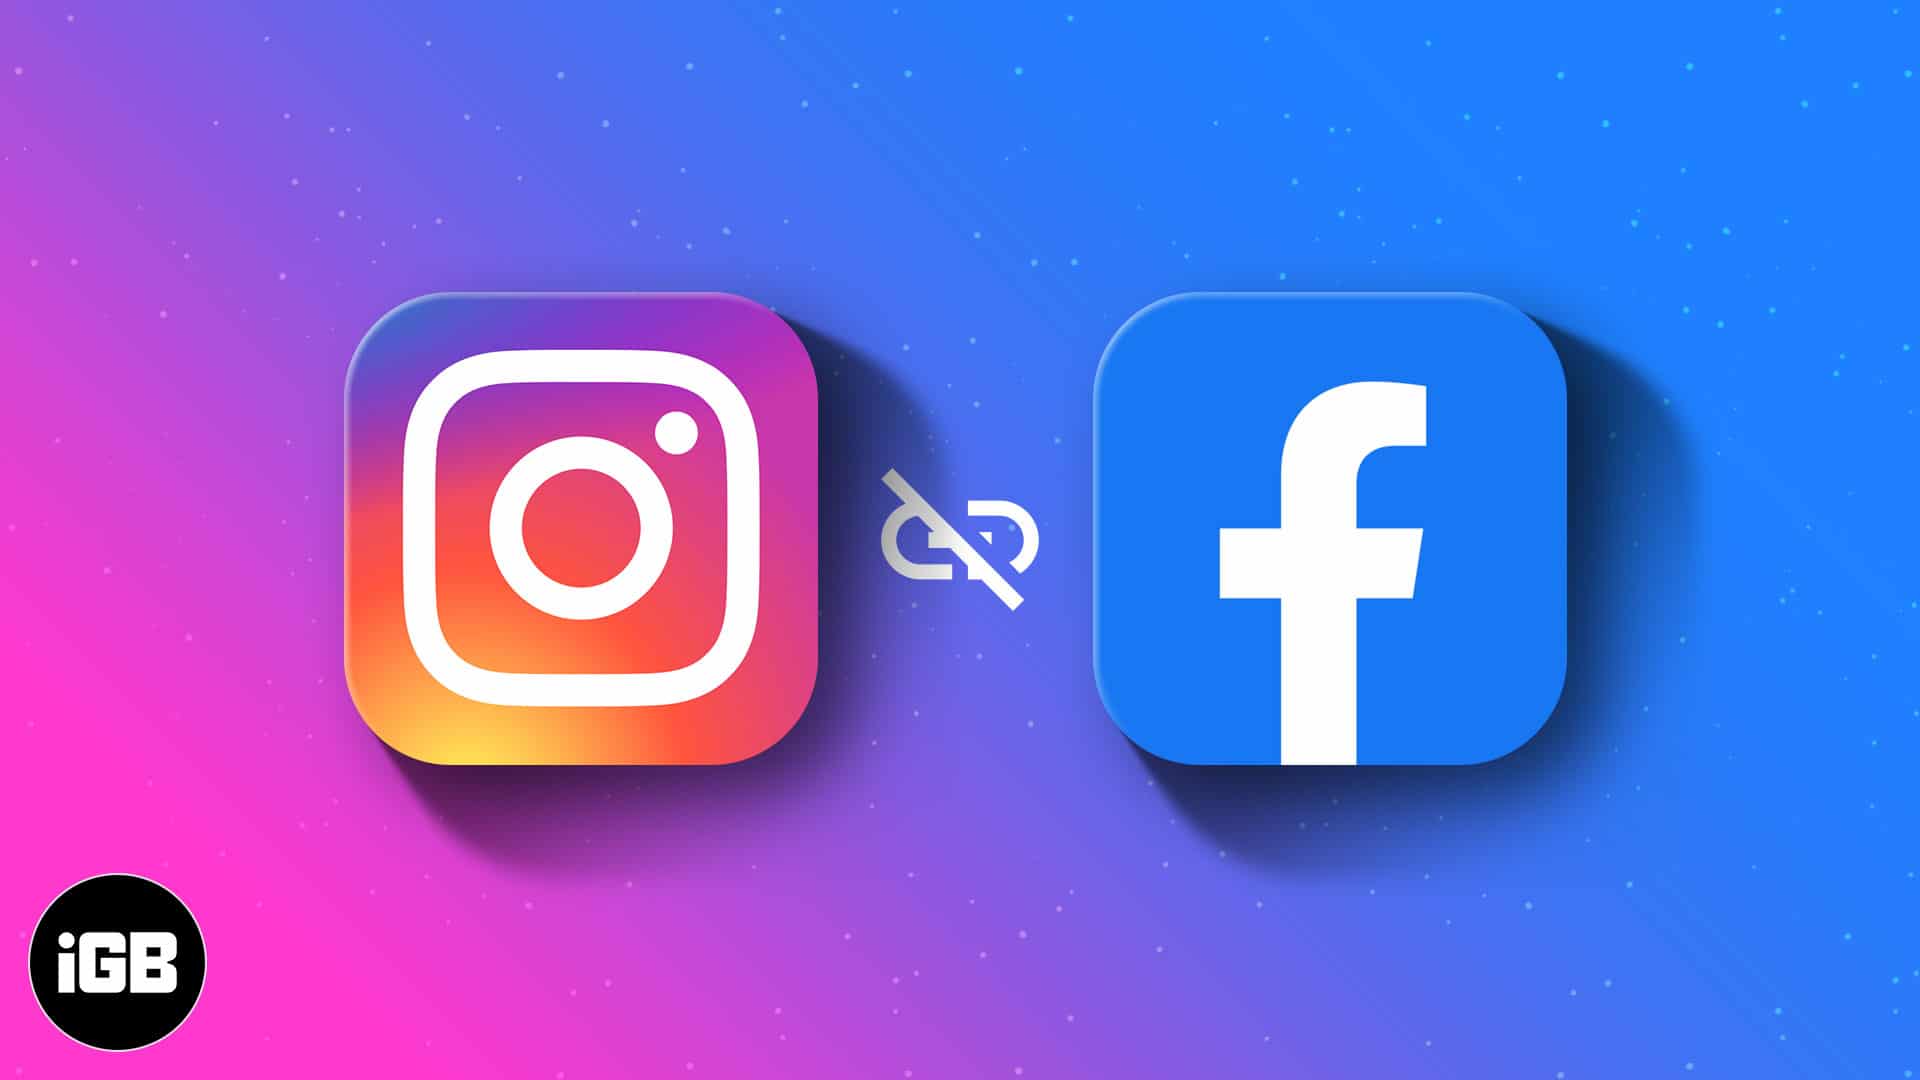 Ensure both your Instagram and Facebook apps are up to date
Verify that you have properly connected your Instagram and Facebook accounts